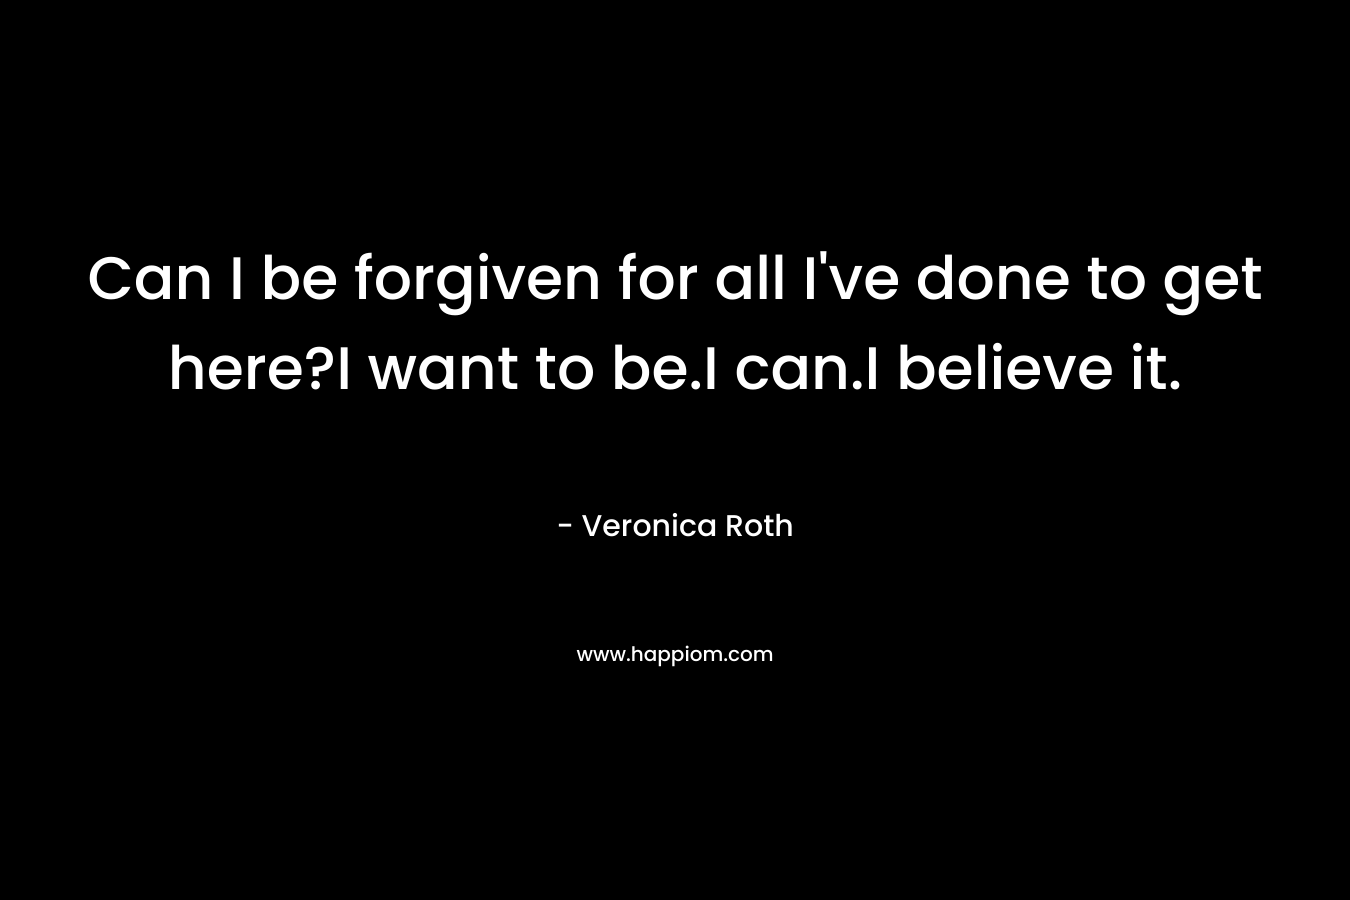 Can I be forgiven for all I’ve done to get here?I want to be.I can.I believe it. – Veronica Roth